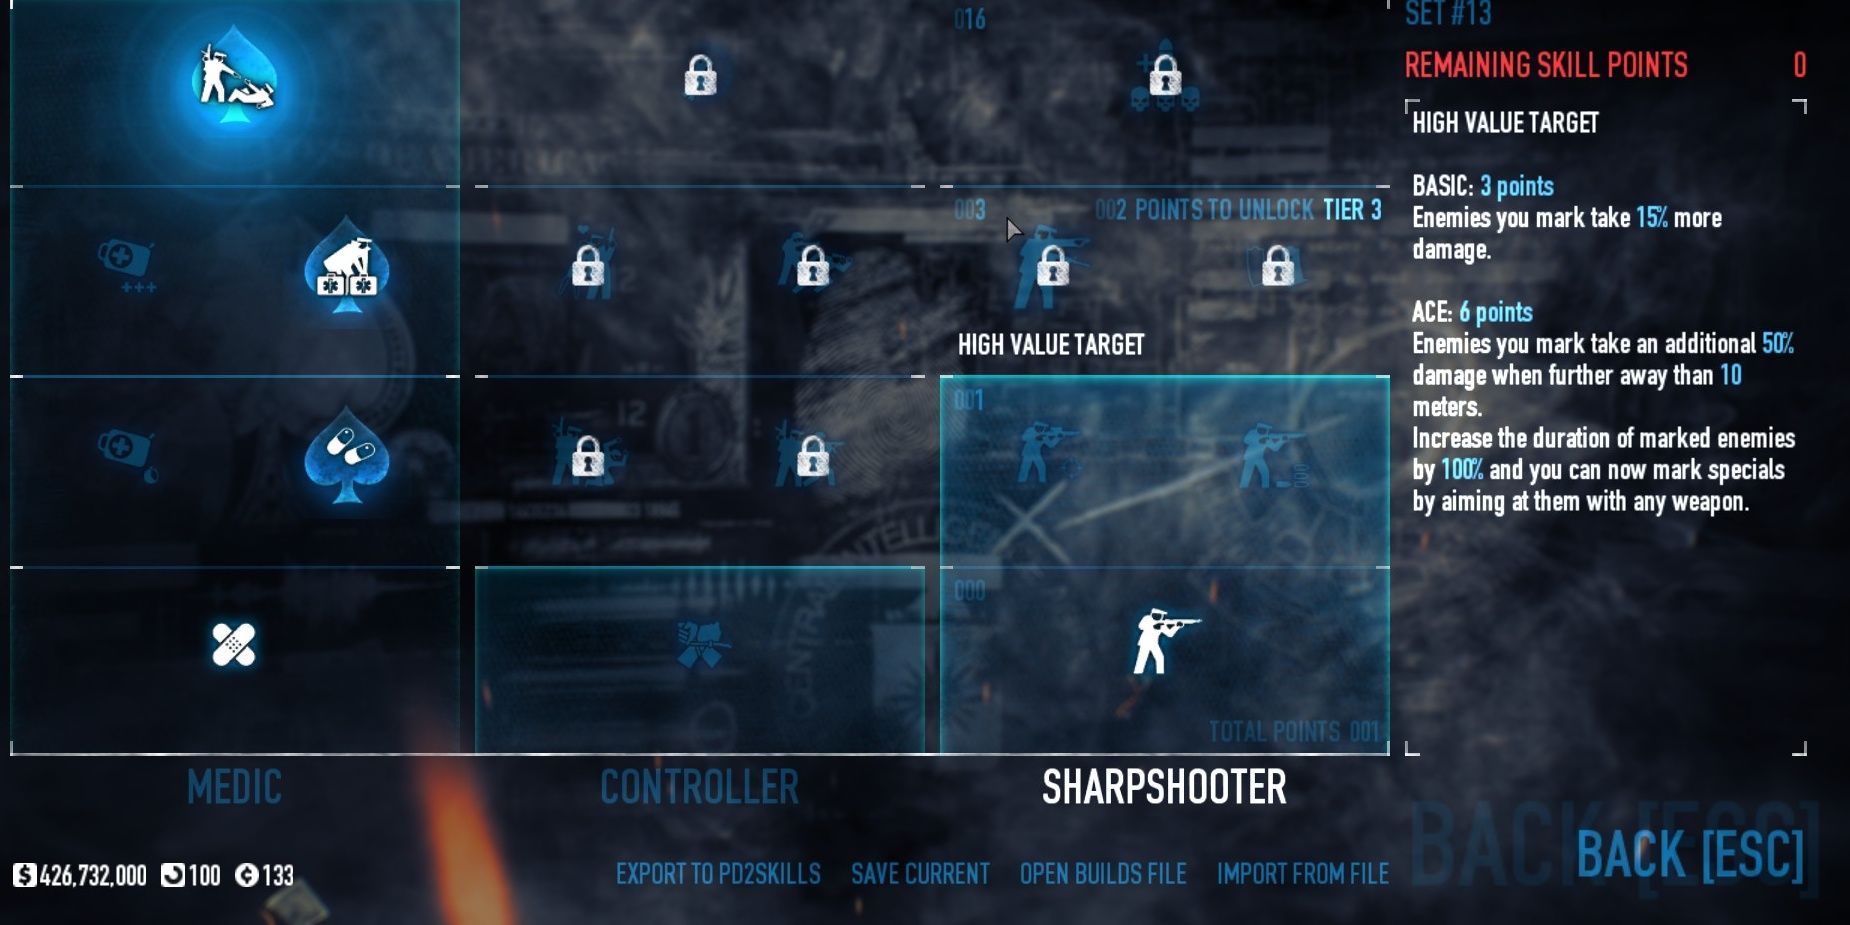 High Level Target selected on skill menu in Payday 2